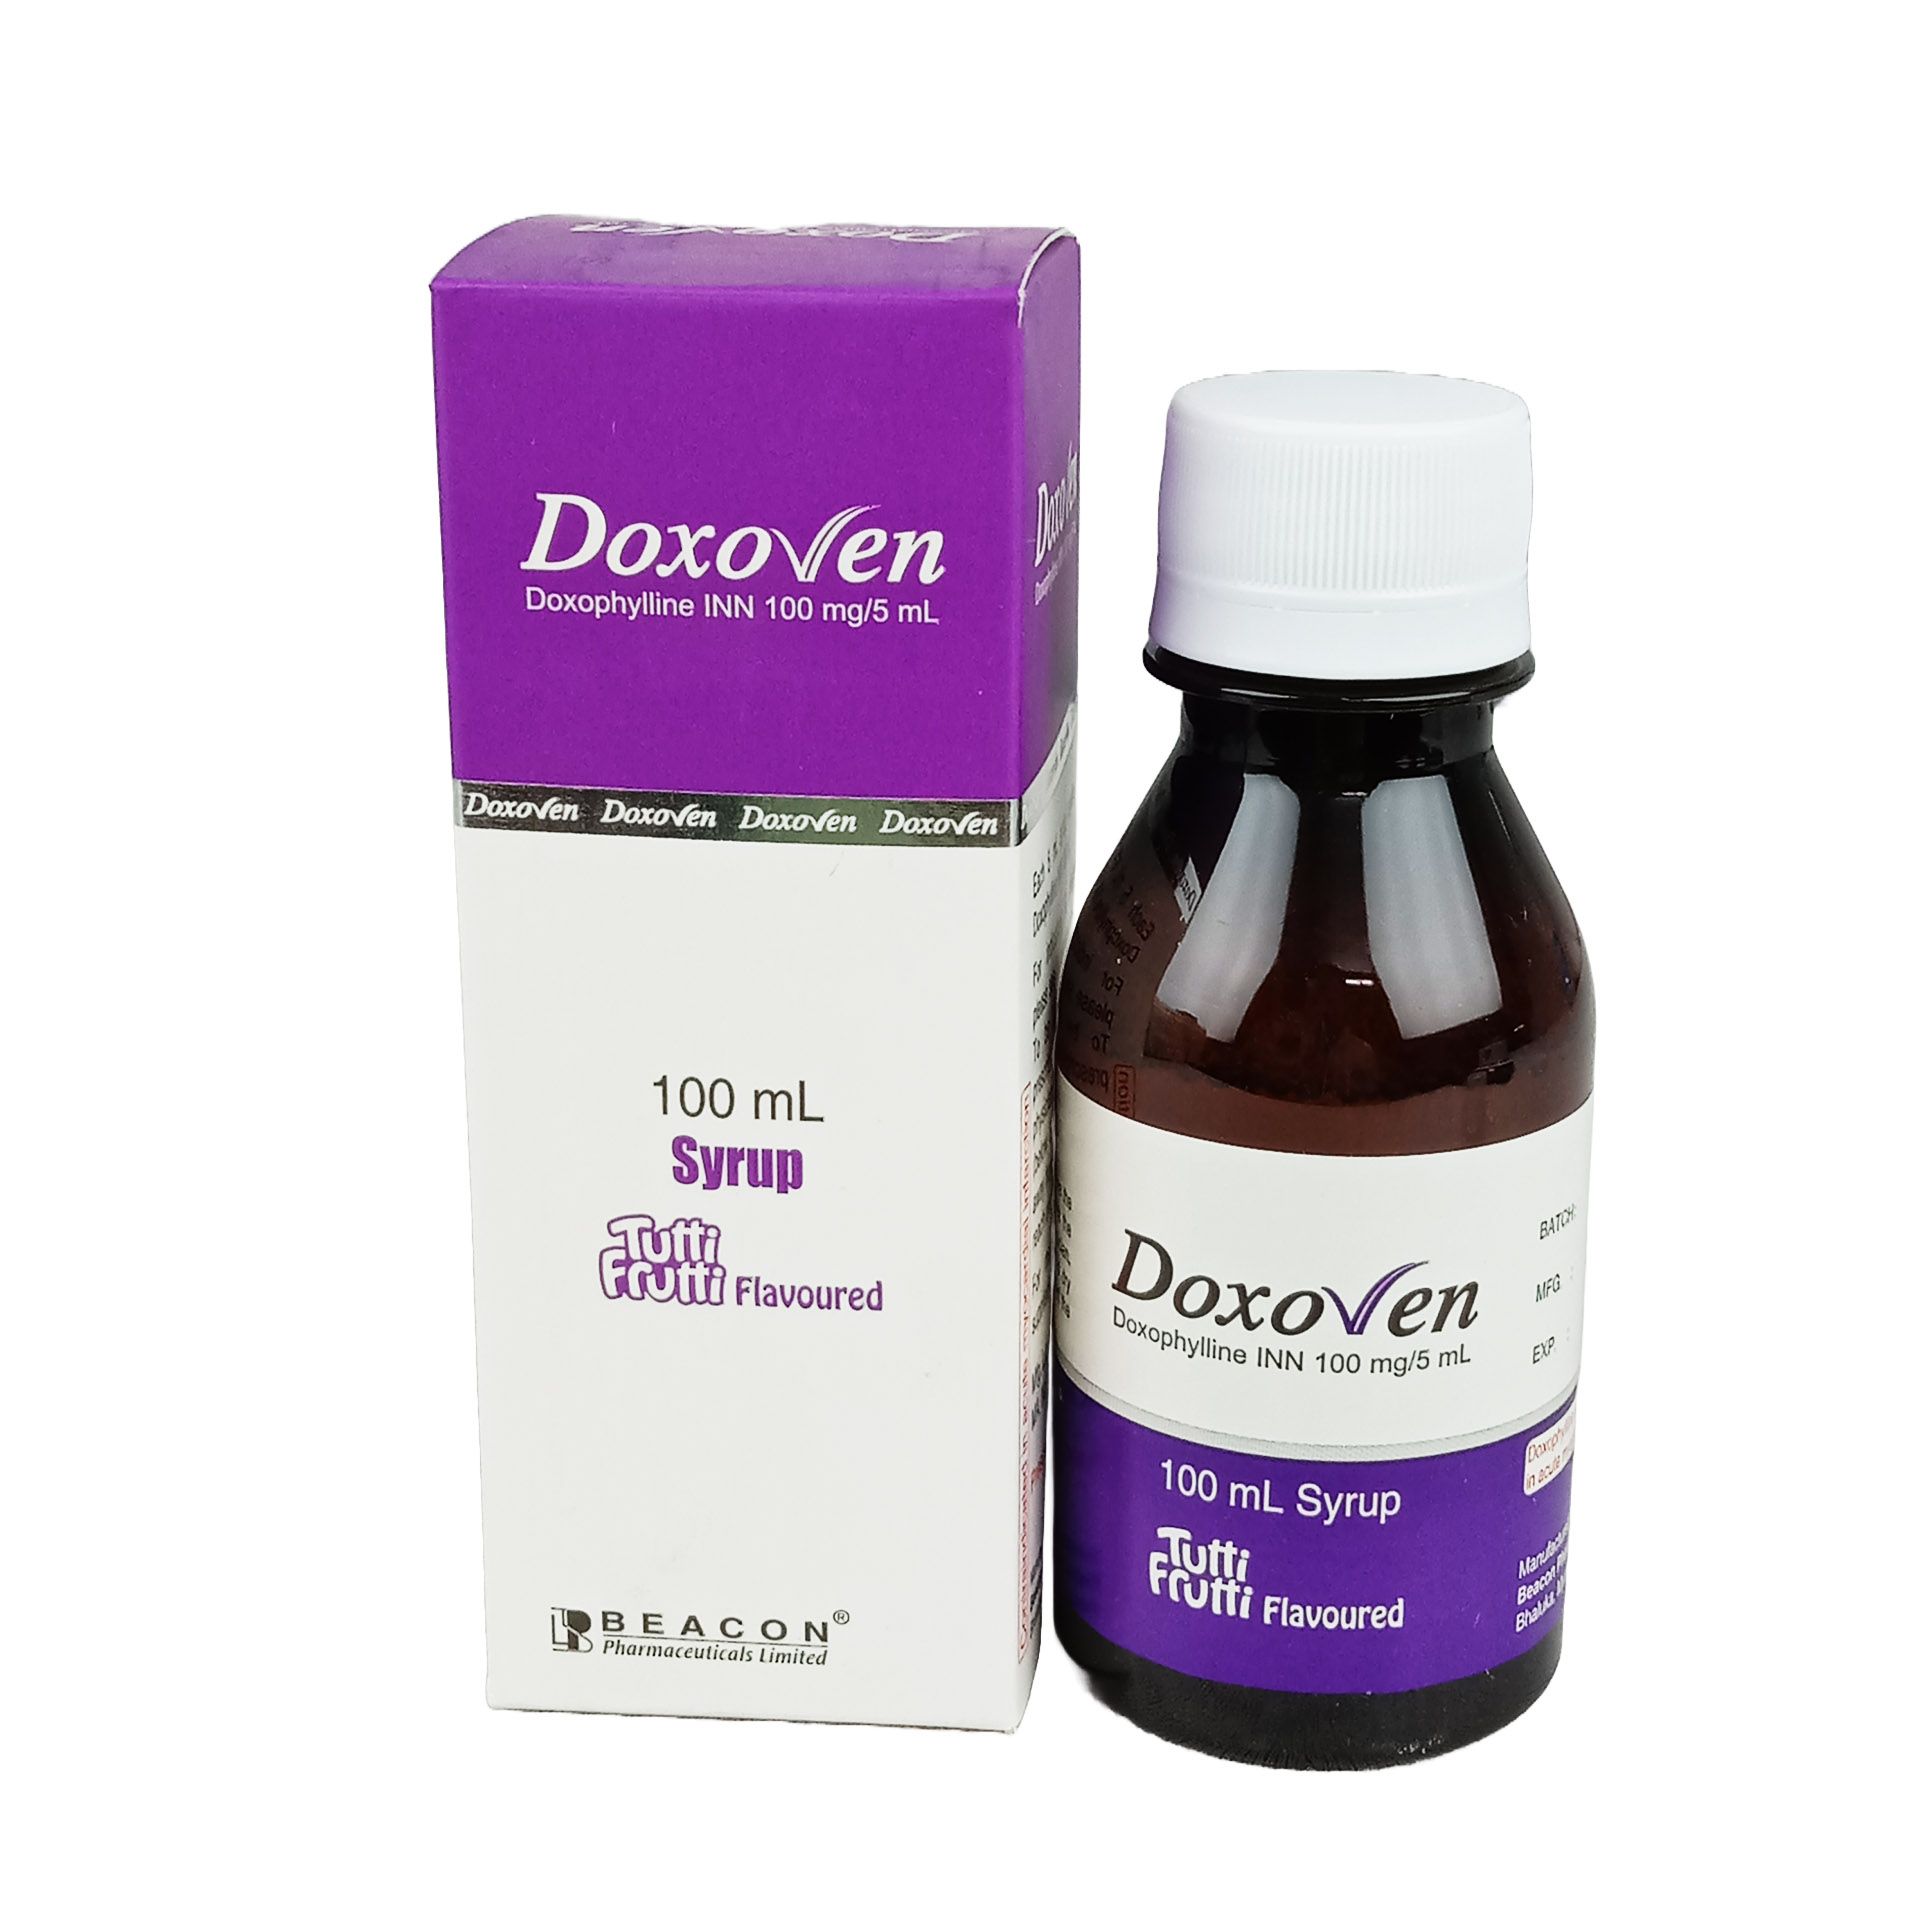 Doxoven 100mg/5ml Syrup